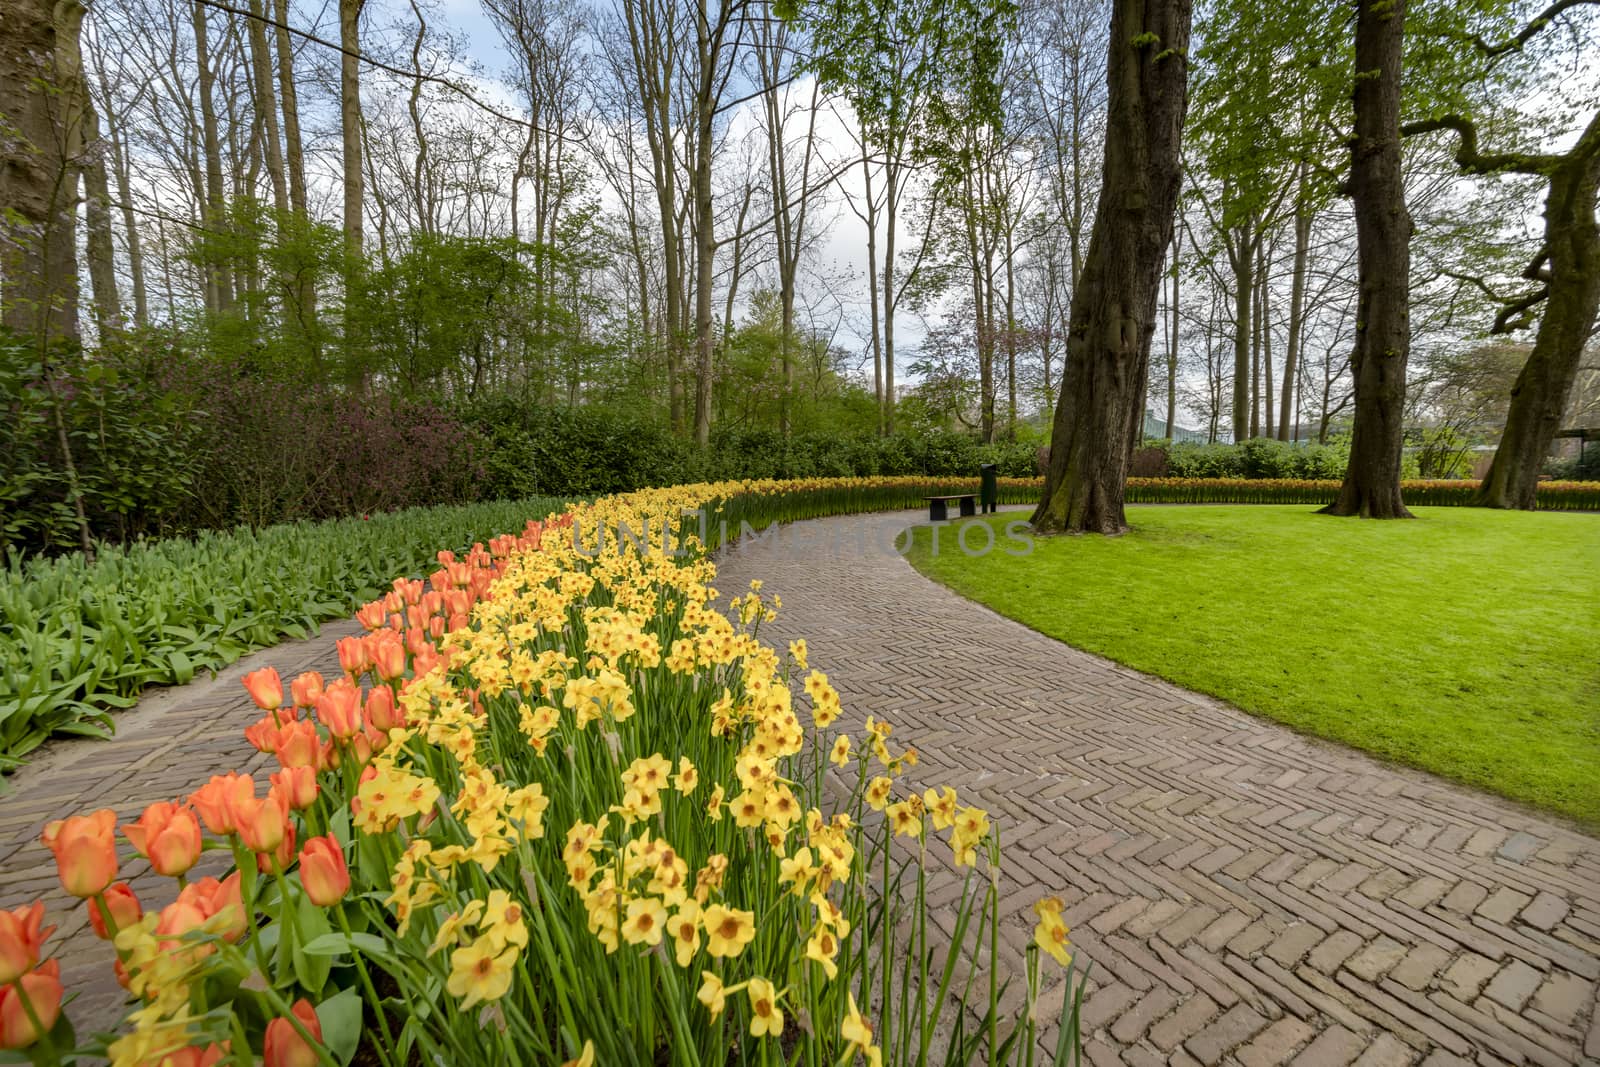 Yellow Daffodil and orange tulip blossom blooming under a very well maintained garden in spring time by ankorlight